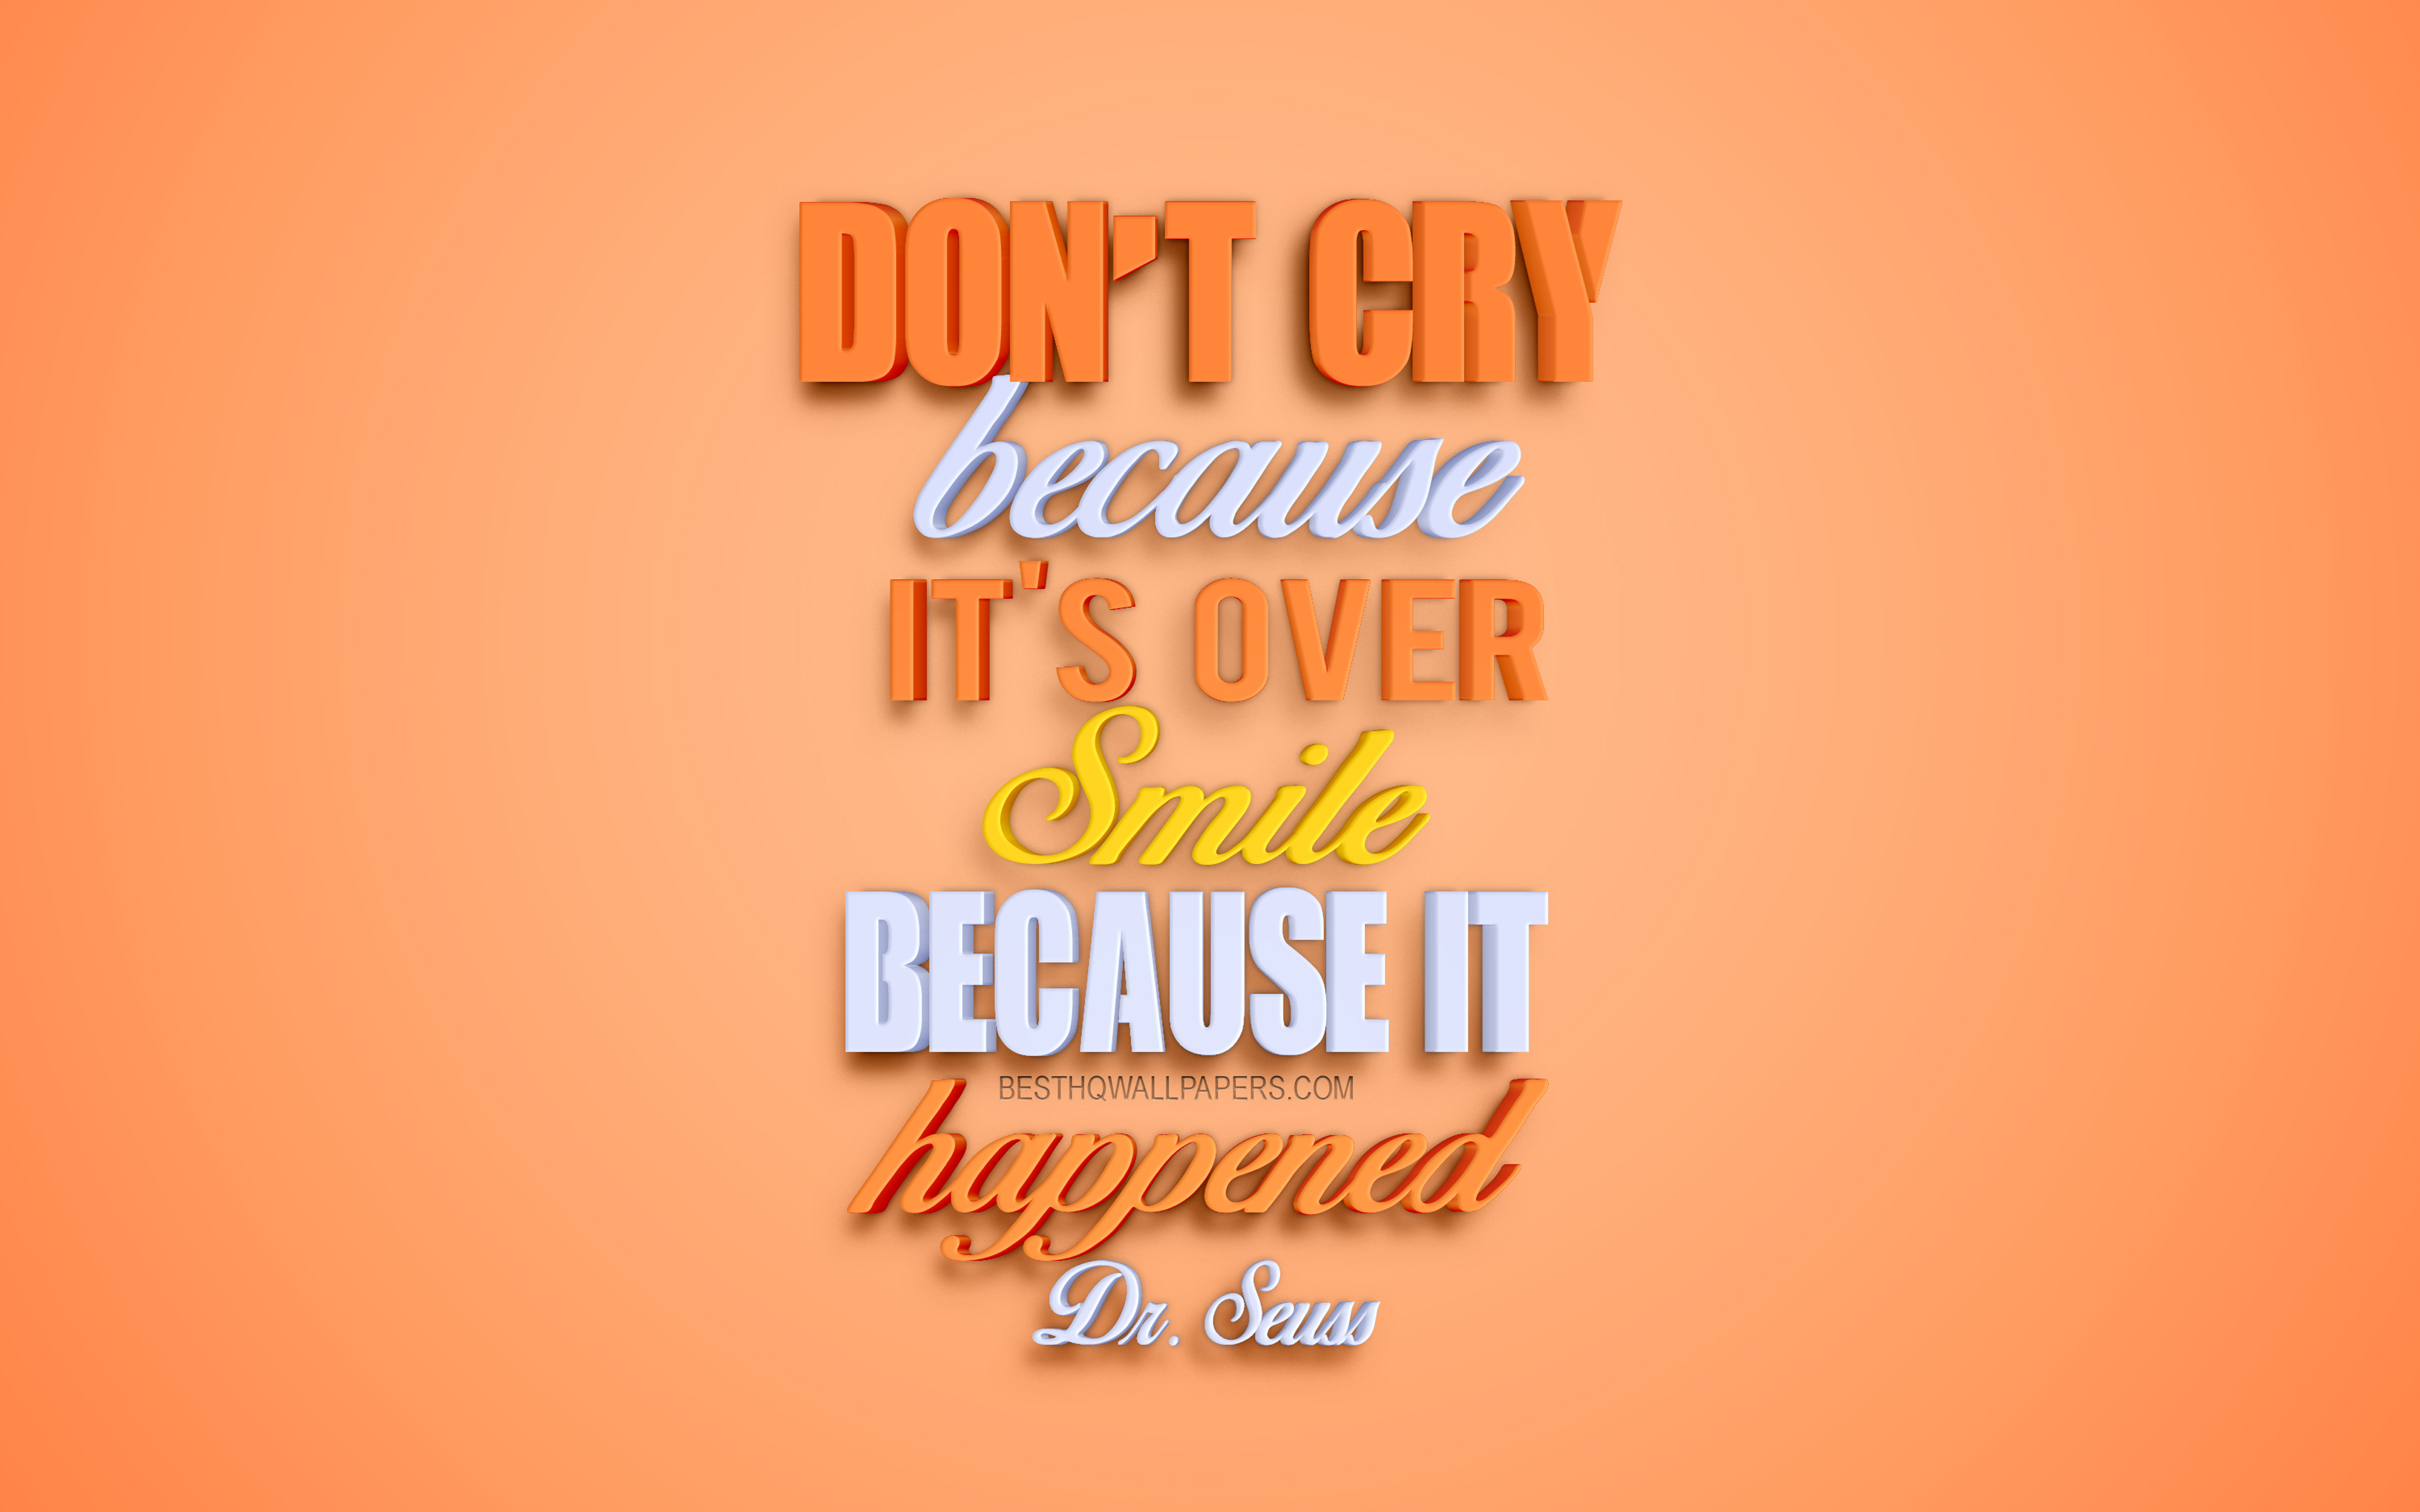 Dont Cry Because Its Over Smile Because It Happened, - Poster - HD Wallpaper 